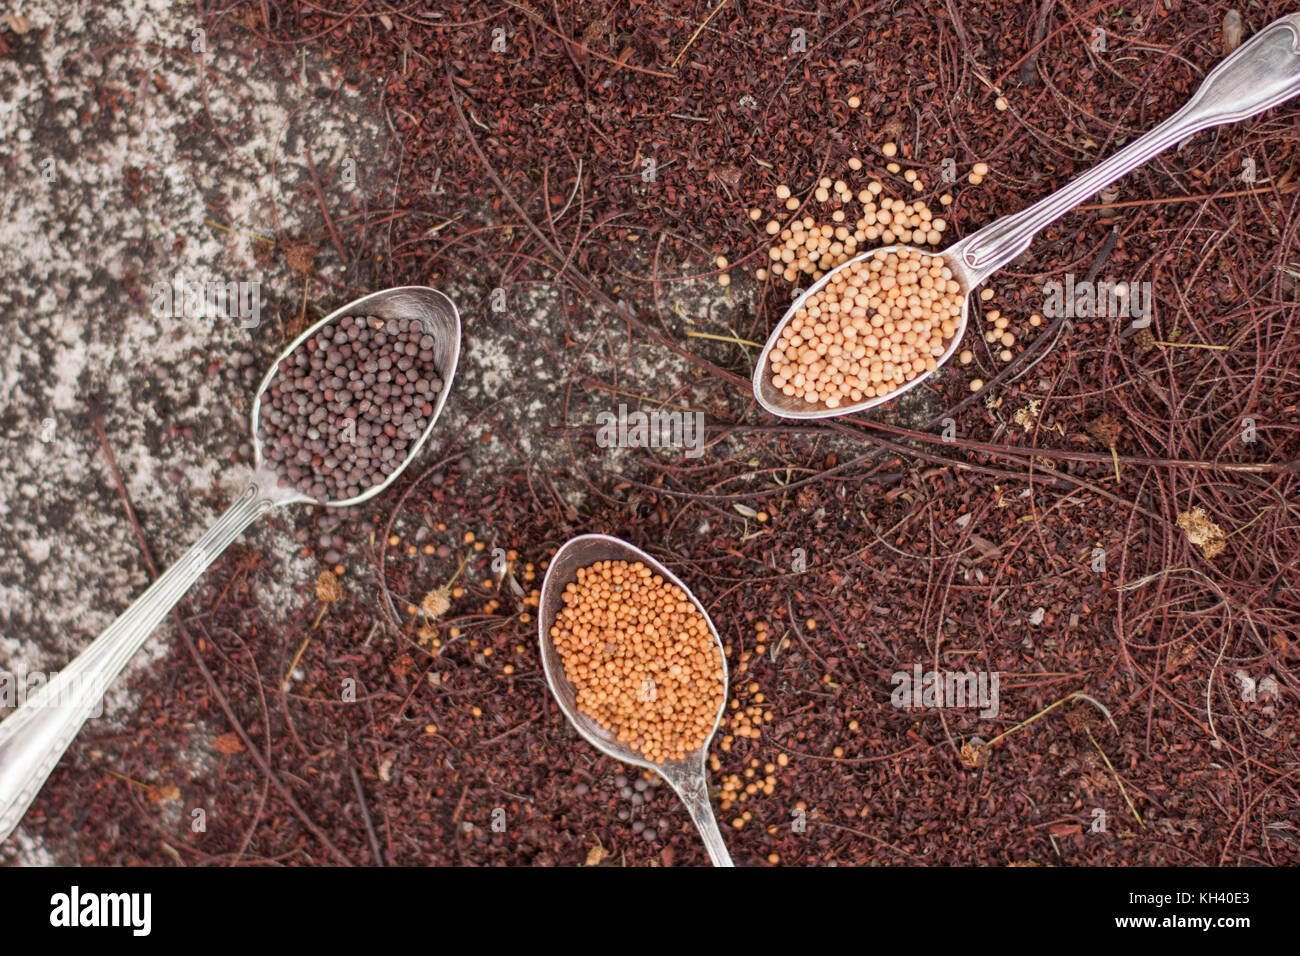 Three diffent colors of mustard seeds in silver spoons over rustic brown background Stock Photo